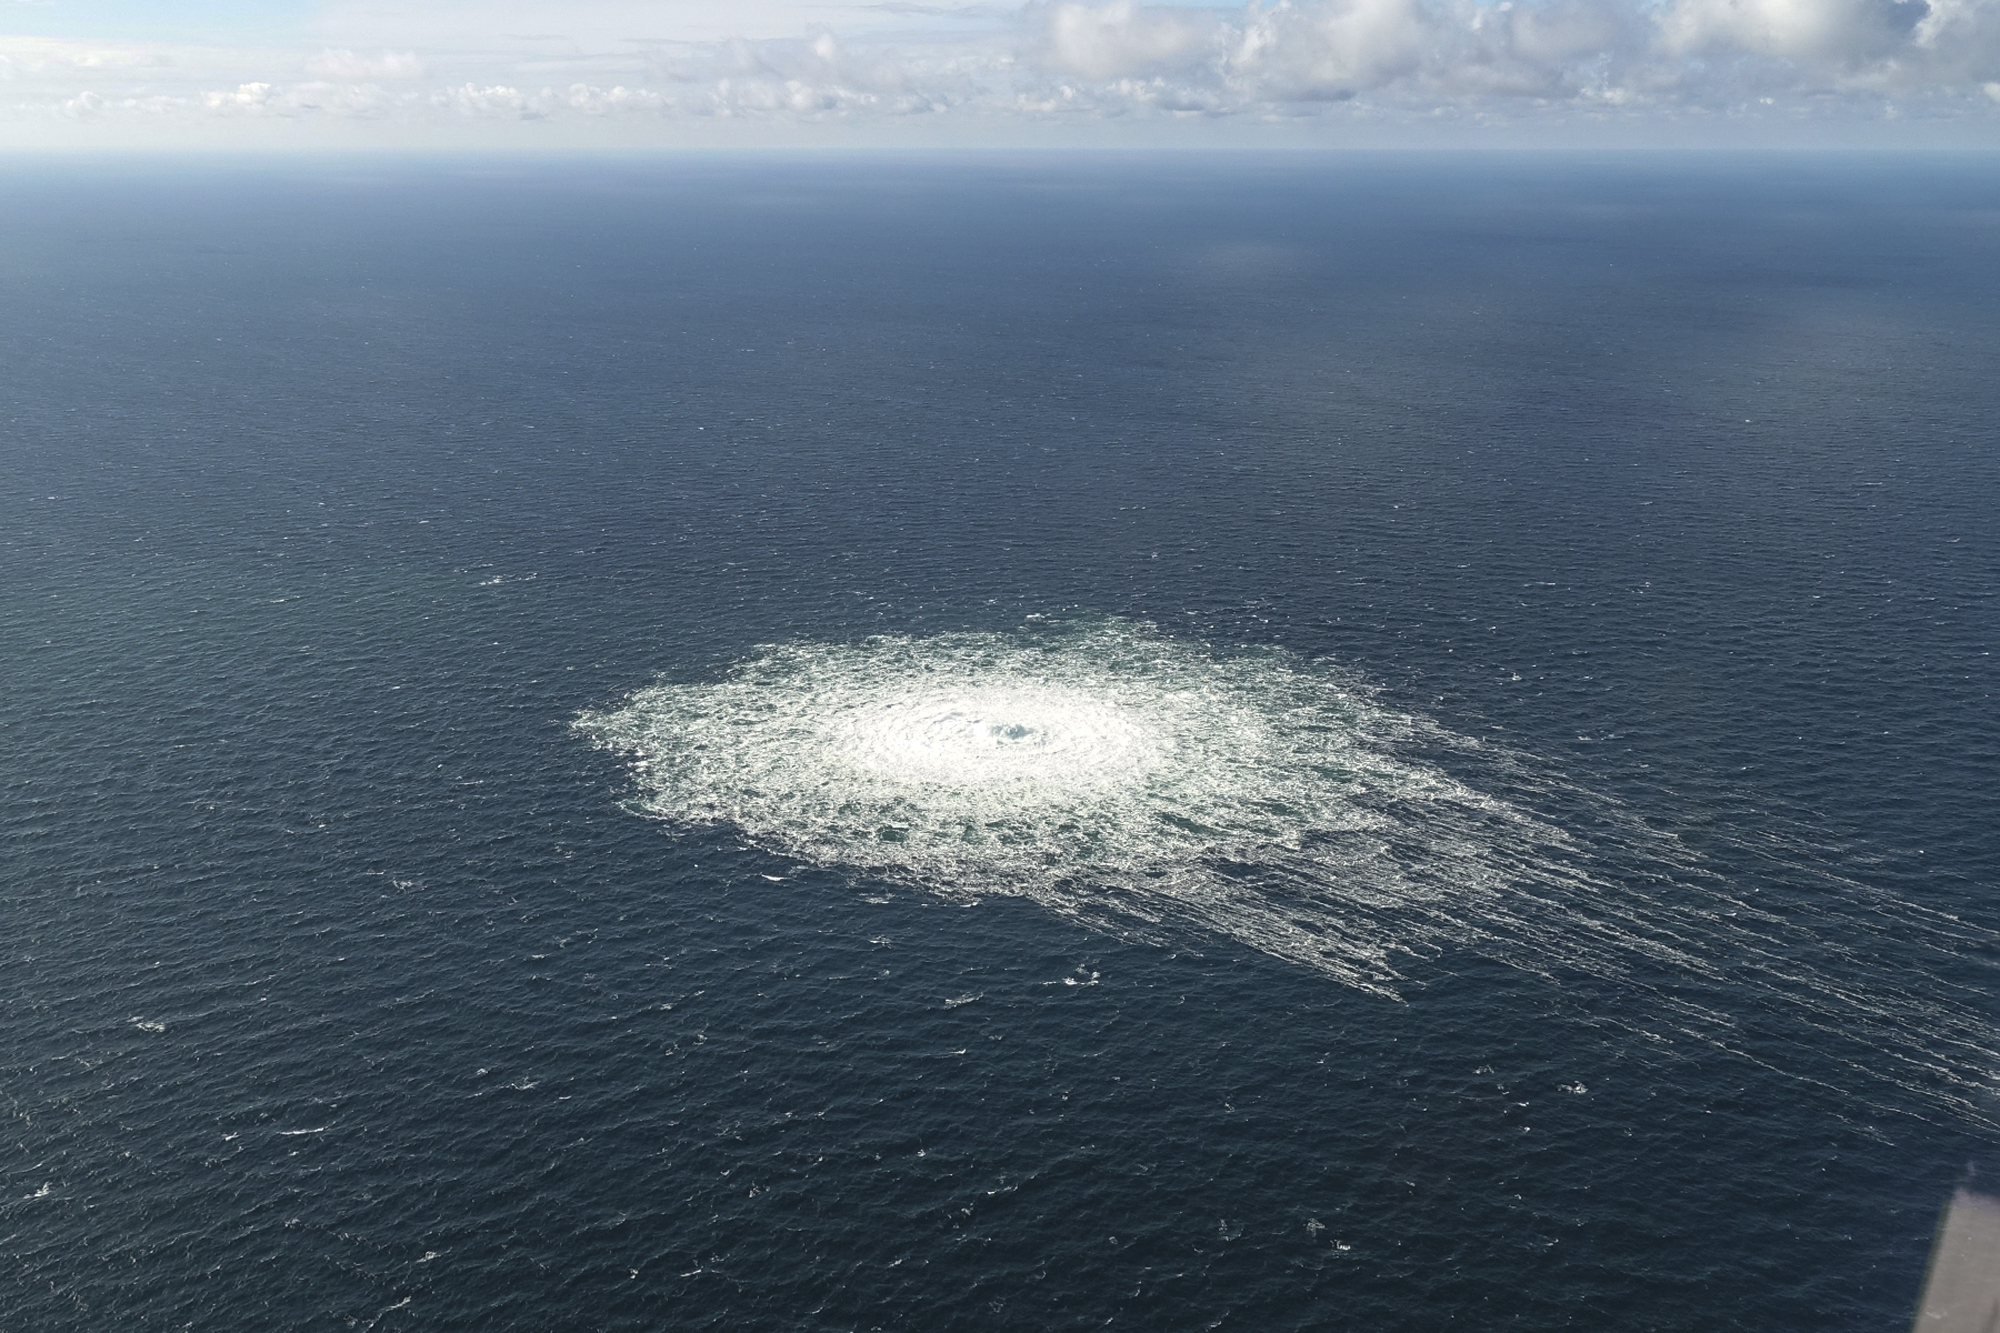 A large disturbance in the sea observed off the coast of the Danish island of Bornholm on September 27.